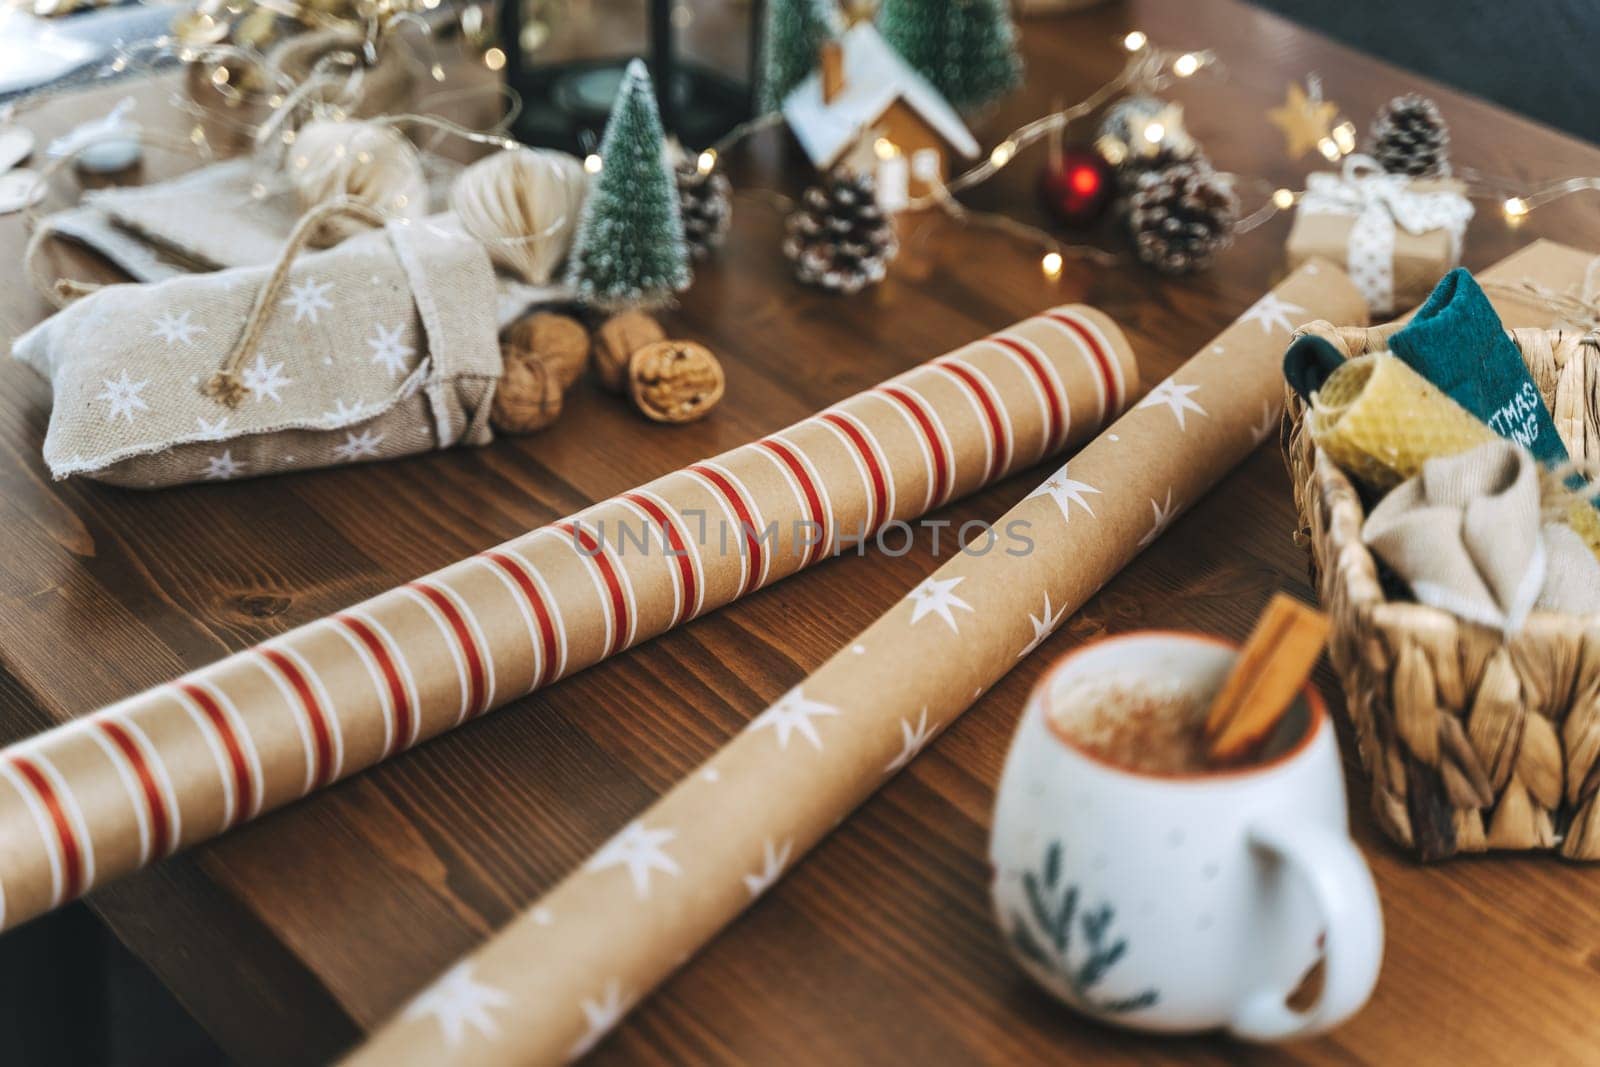 Preparing Christmas eco gift. Wrapping paper, wicker basket, coffee cup. Unprepared presents on wooden table with natural decor elements and items Christmas packing wrapping Concept by Ostanina